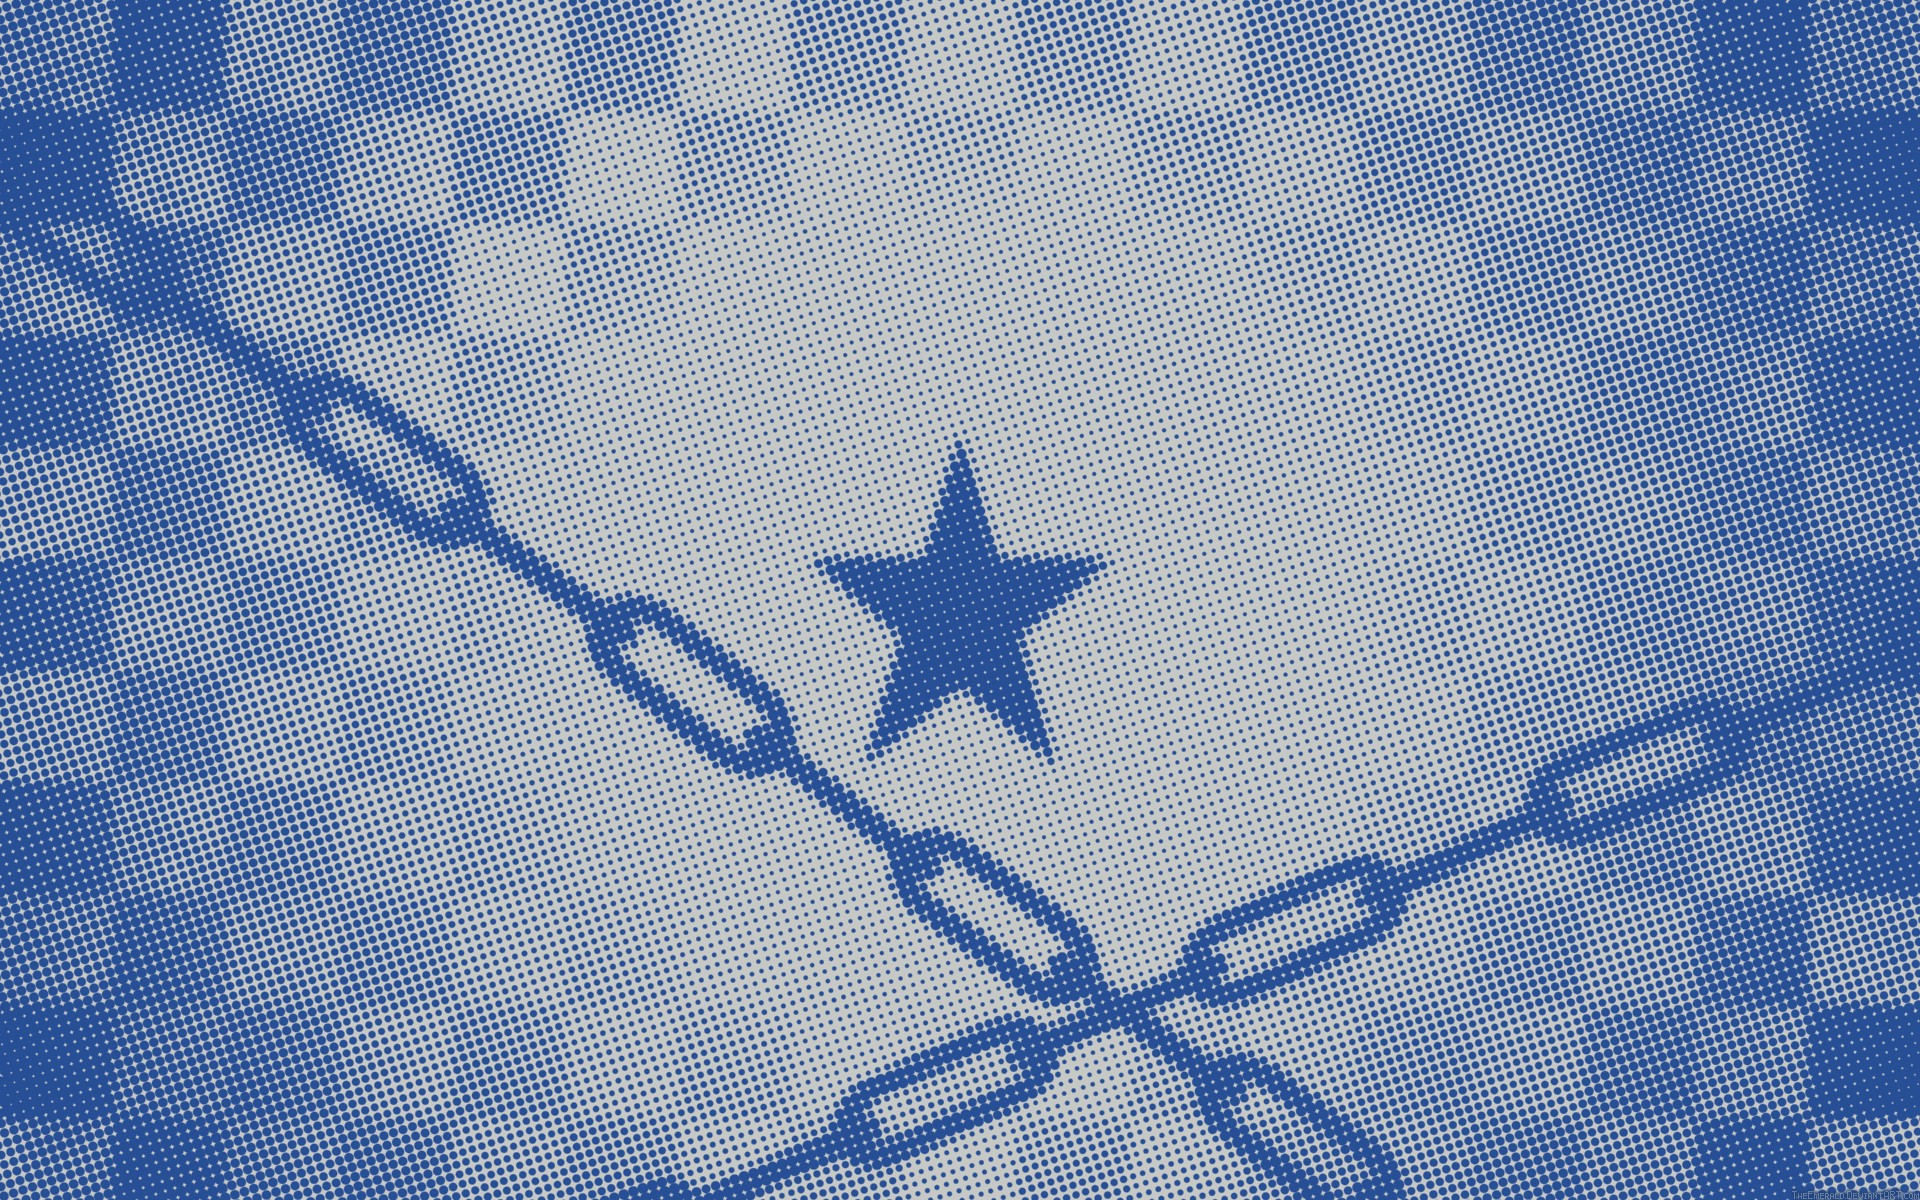 Black Rock Shooter Blue White Chains Halftone Pattern Images, Photos, Reviews